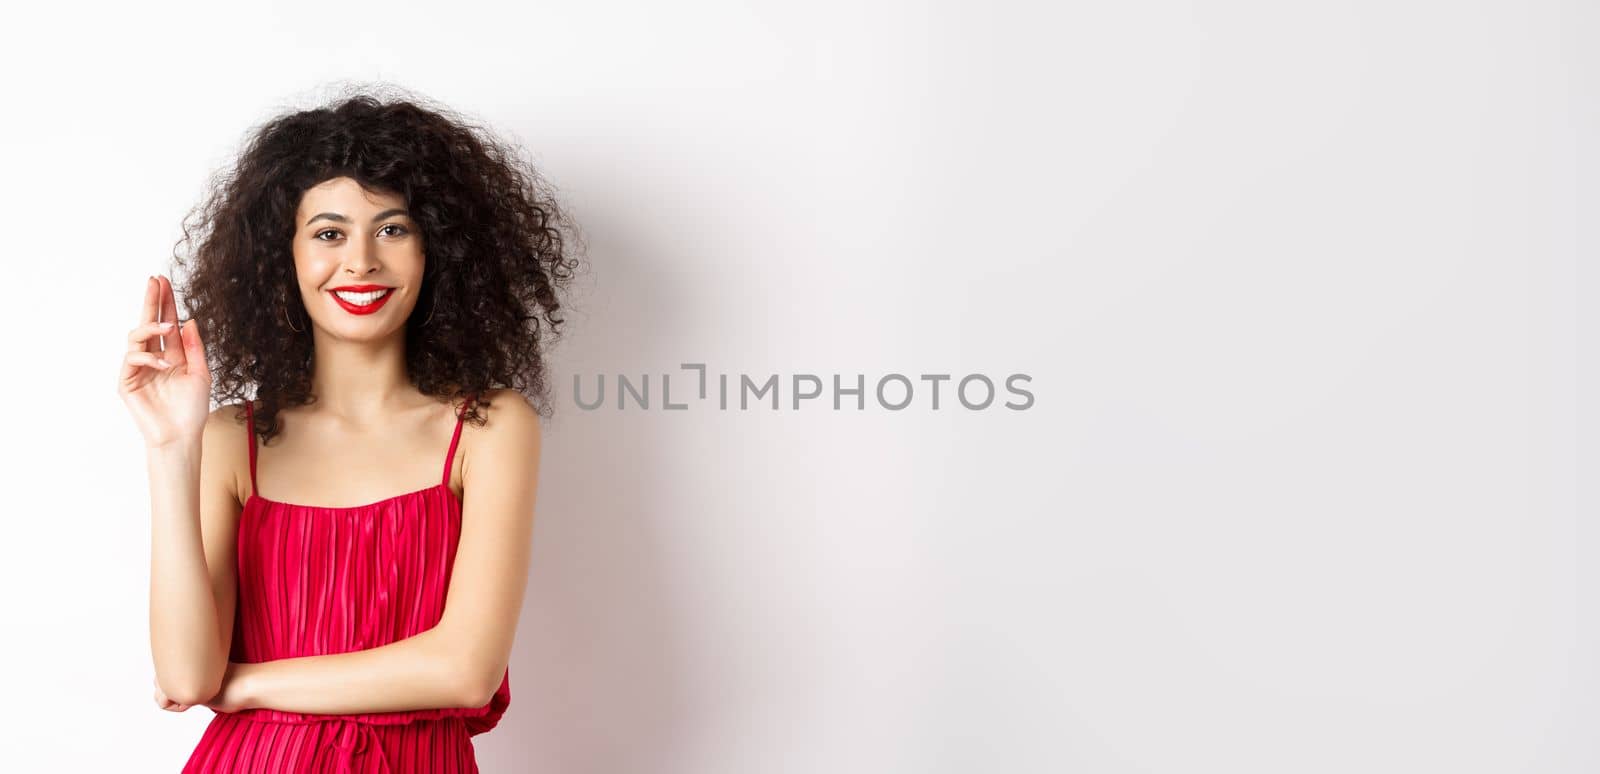 Beauty and fashion. Smiling woman with curly hair and makeup, wearing red dress, waving hand in greeting gesture, saying hello, standing on white background.